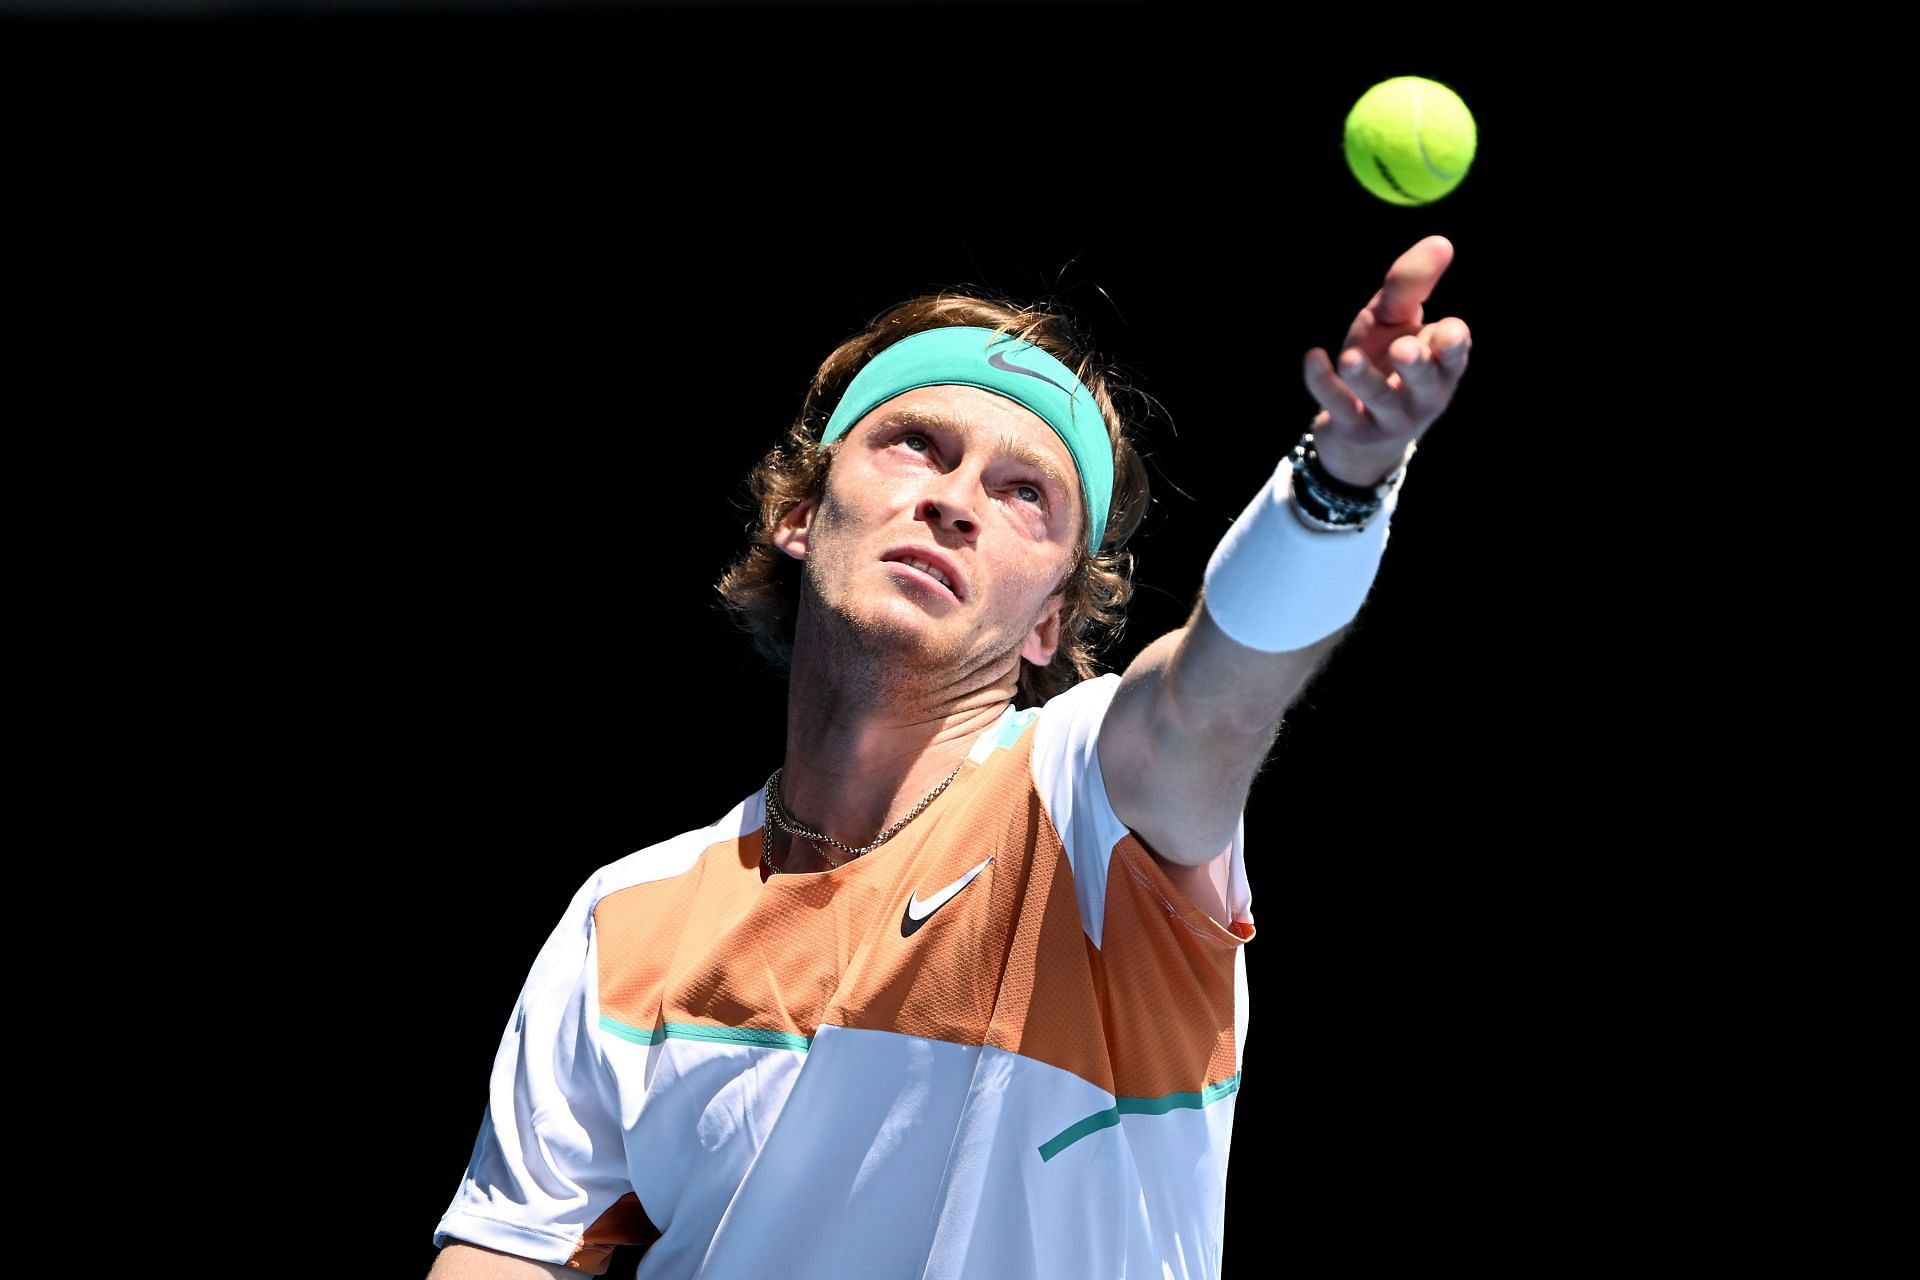 Rublev at the 2022 Australian Open.